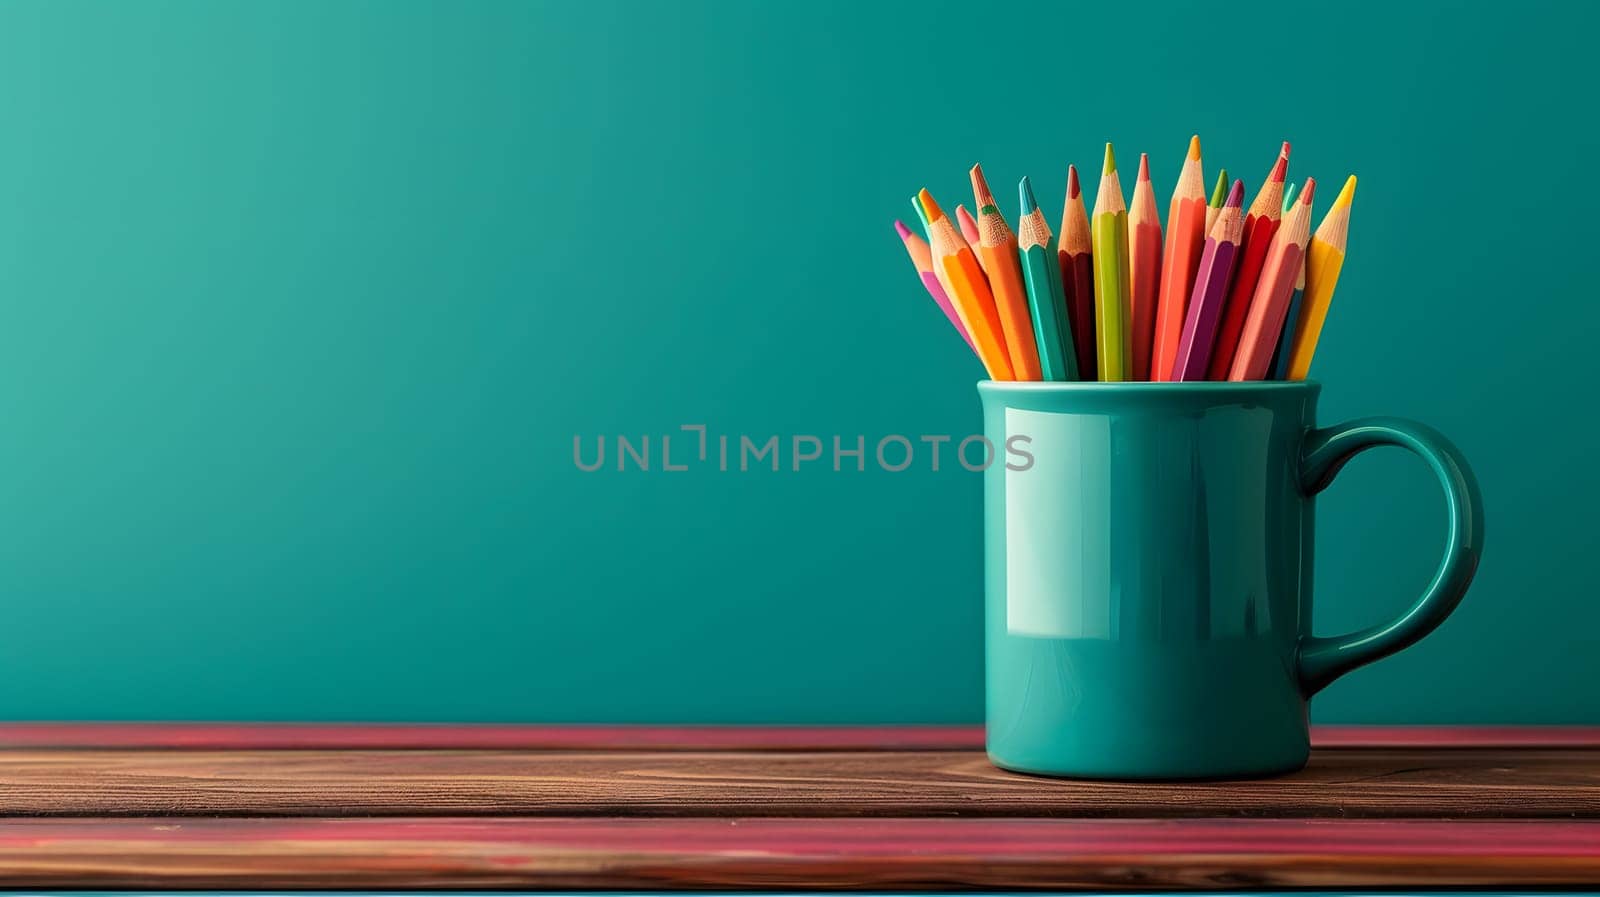 A desk organizer filled with writing implements in shades of magenta, including pencils, is placed on a wooden table